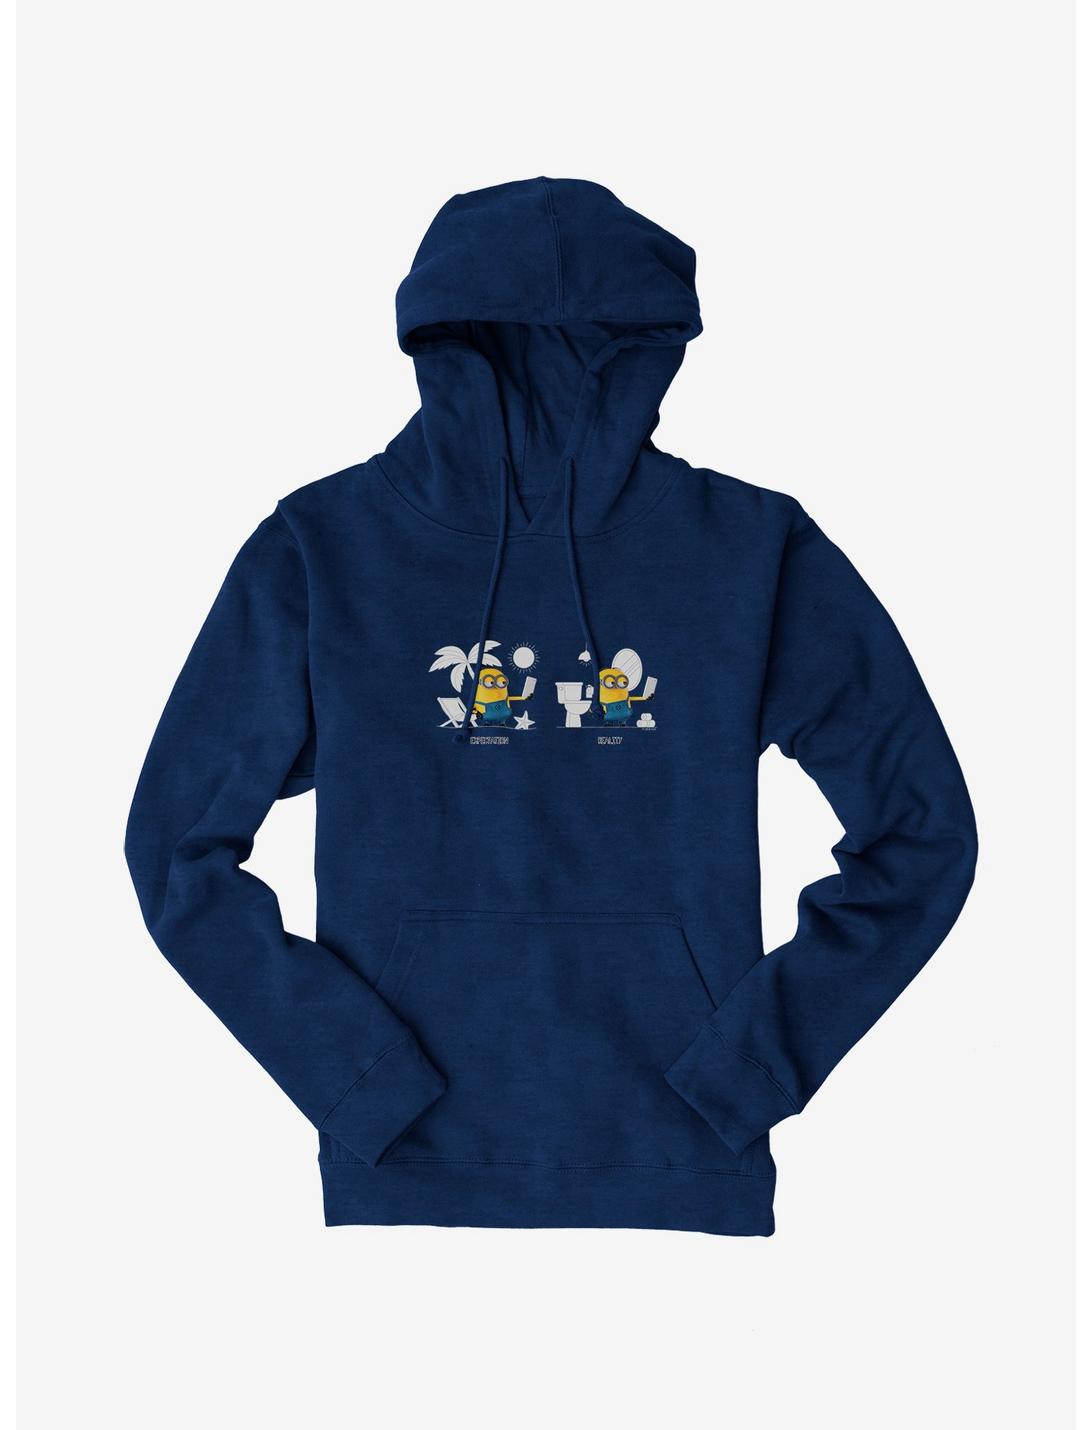 Minions Selfie Expectation Vs Reality Hoodie, NAVY, hi-res